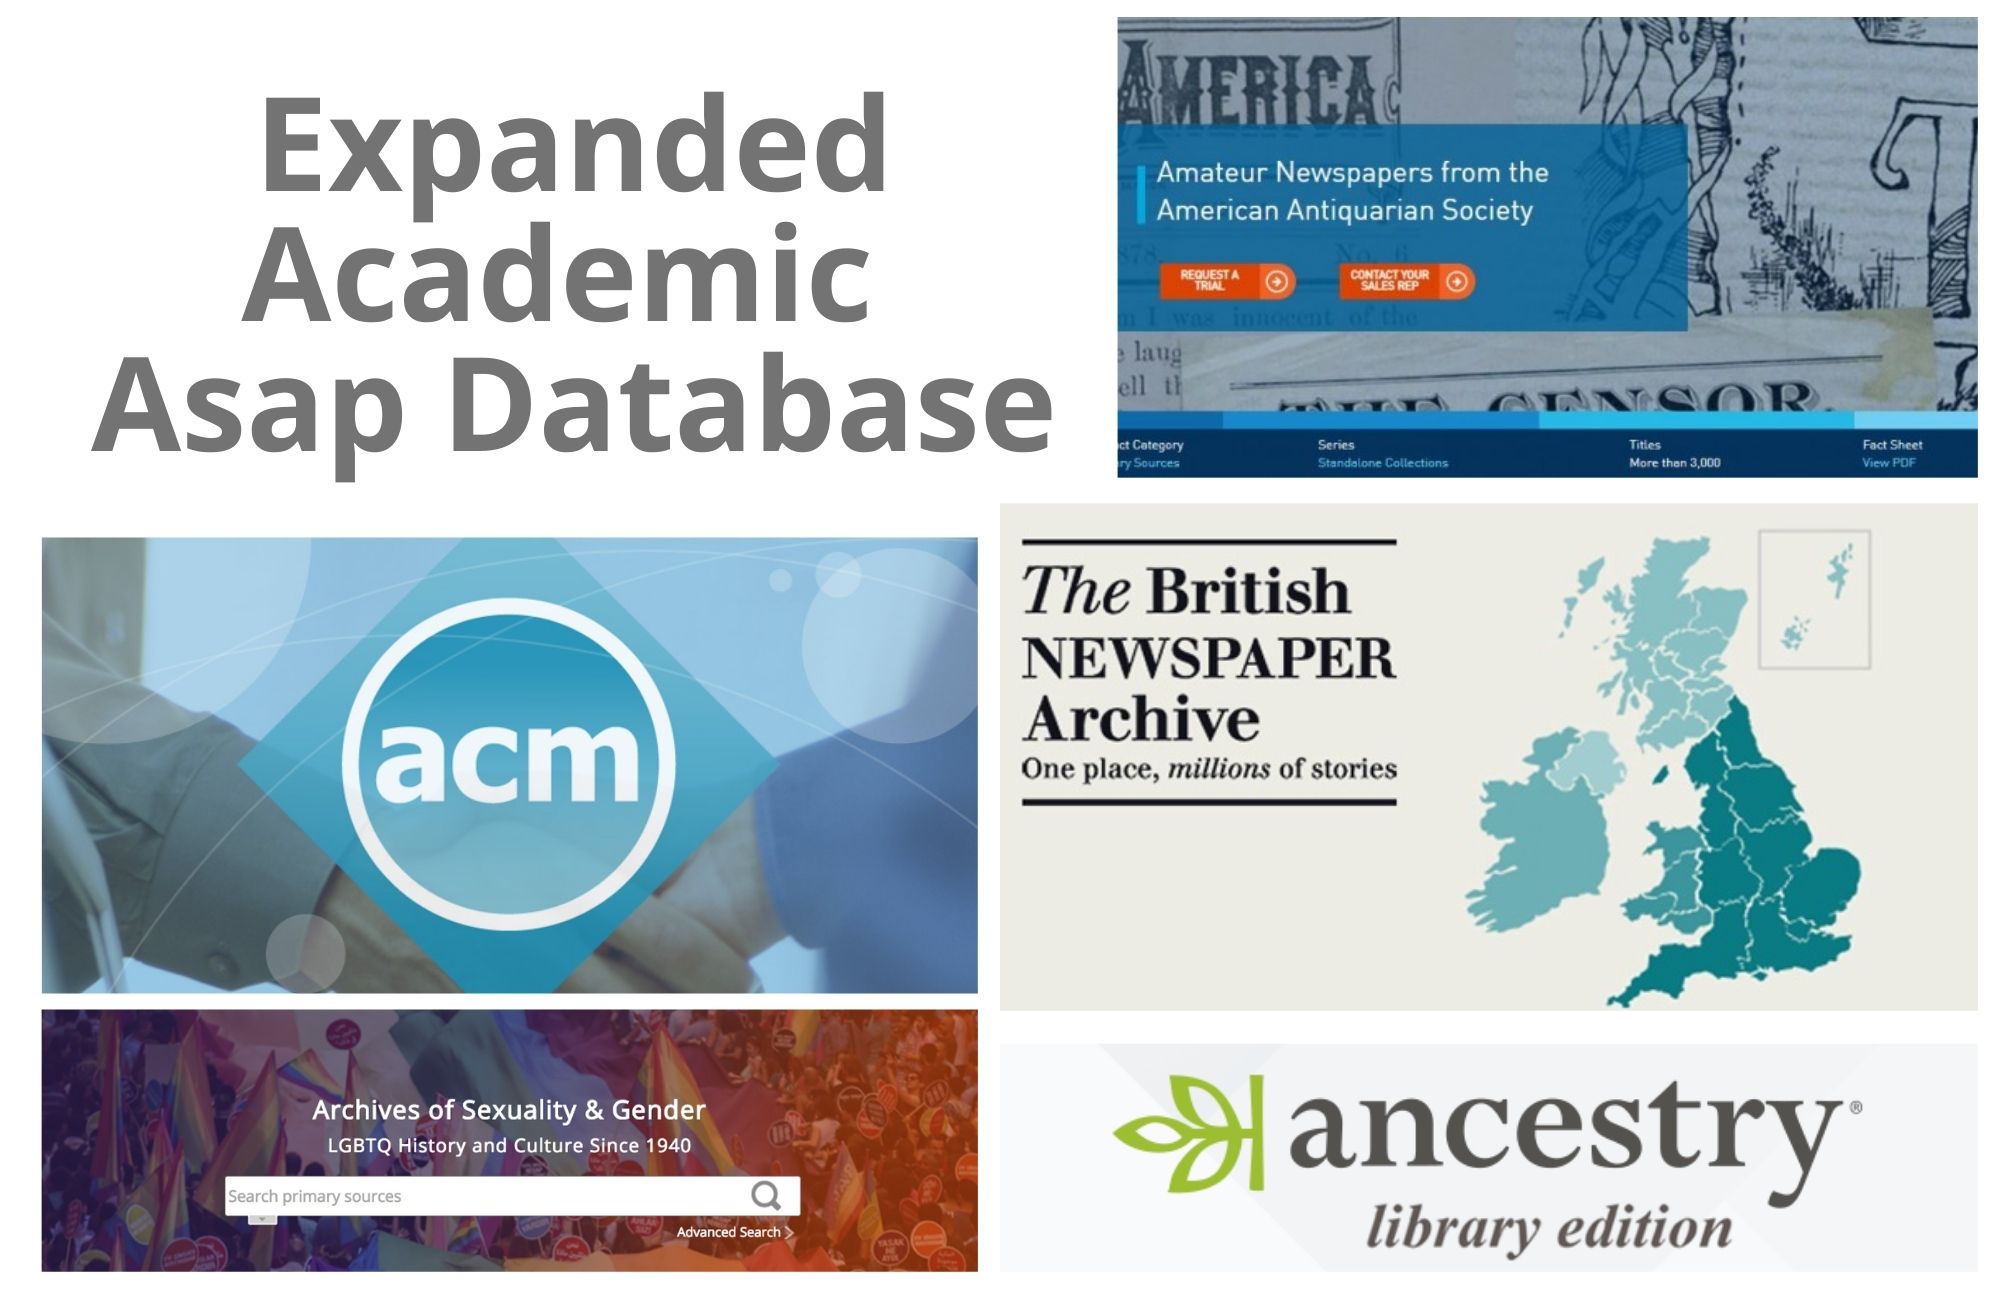 Expanded Academic Asap Database - Put The World's Finest Publications And Reference Sources At Your Users’ Fingertips